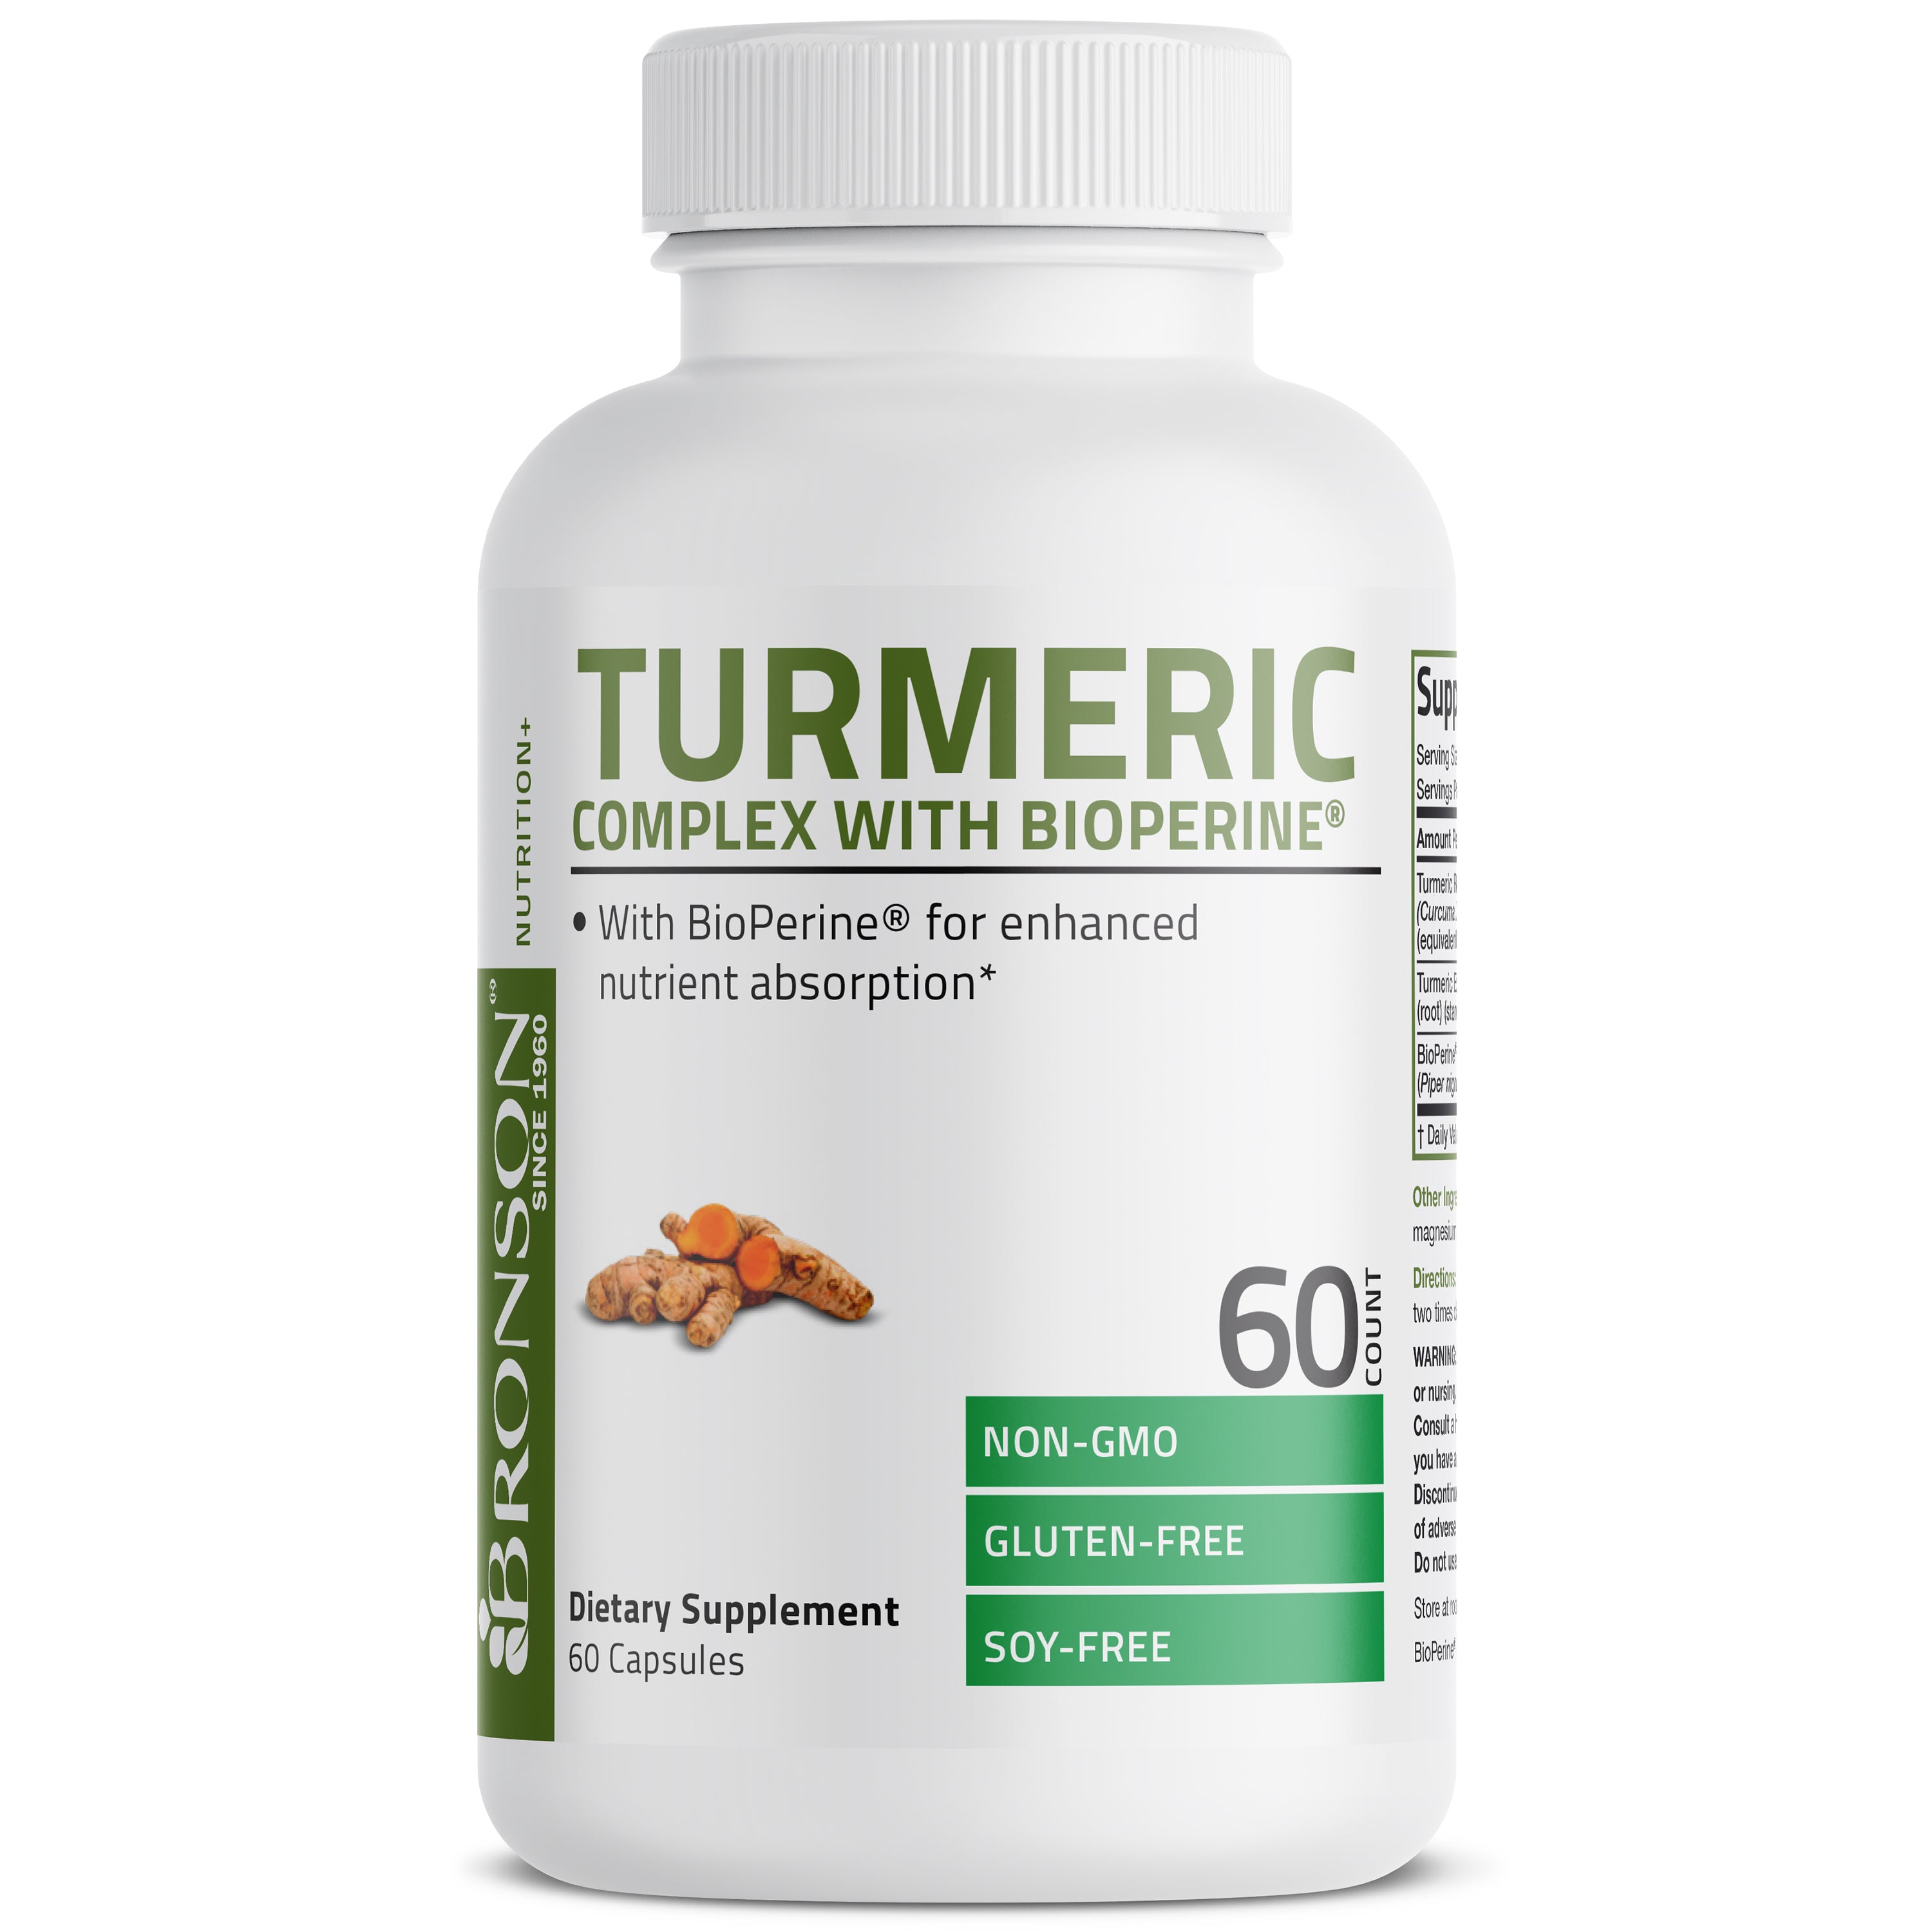 Turmeric Complex with BioPerine® - 1,000 mg view 4 of 6